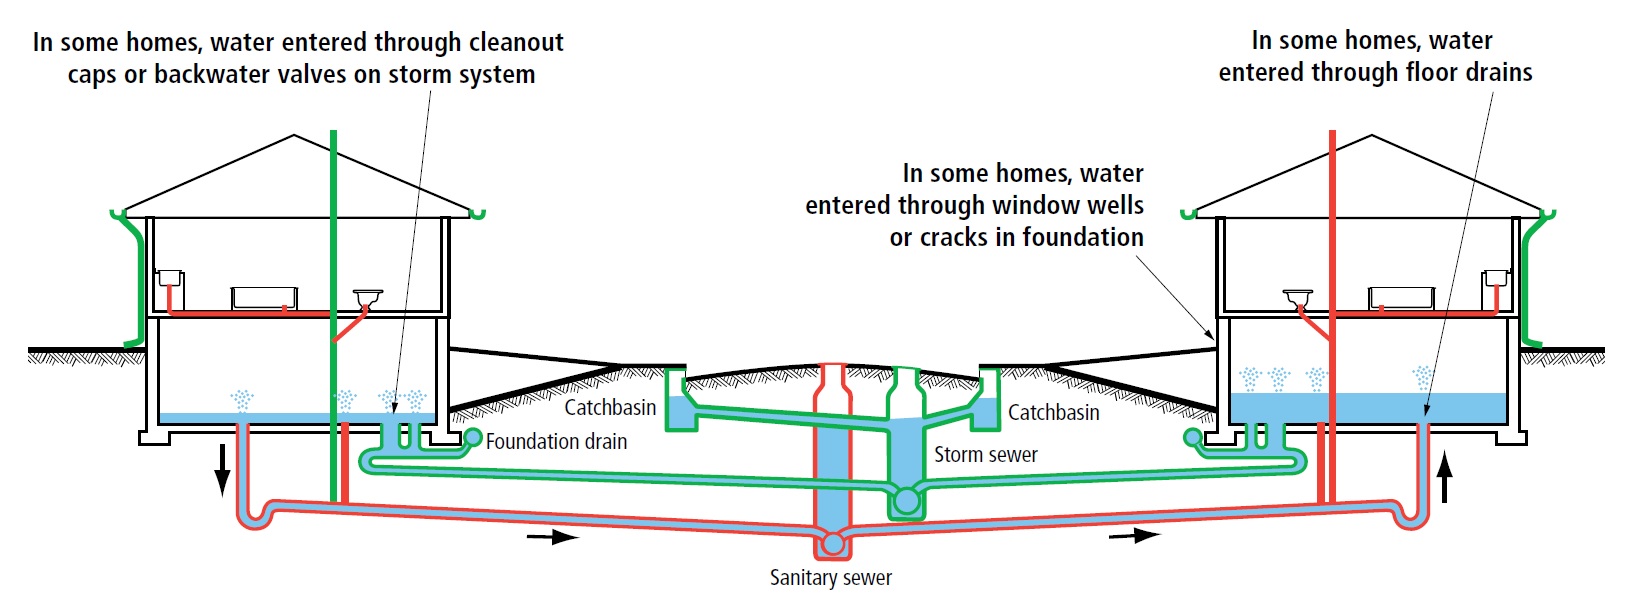 How water can enter your home